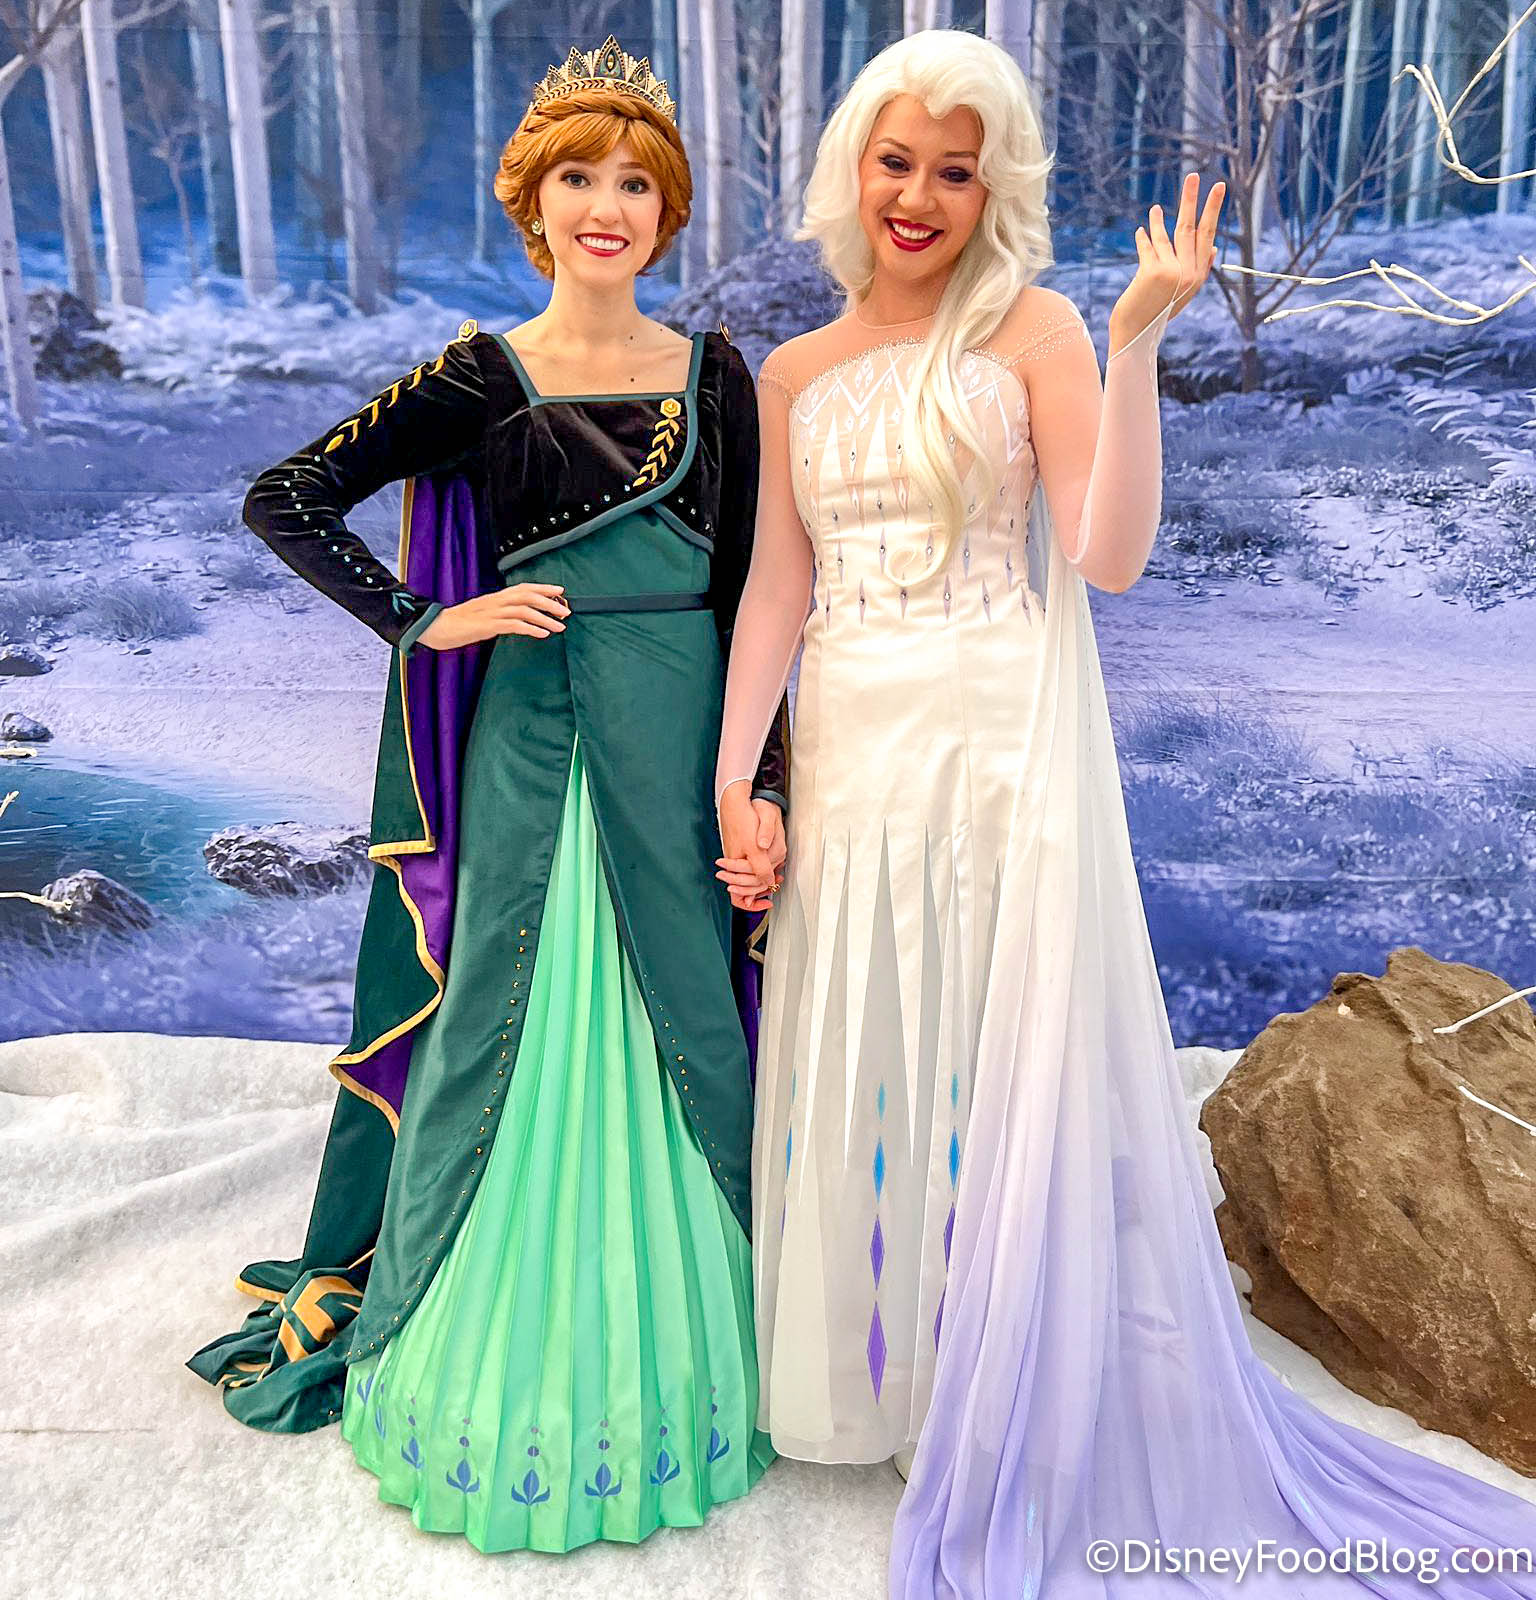 Frozen 3: The Magic Continues in New Sequel